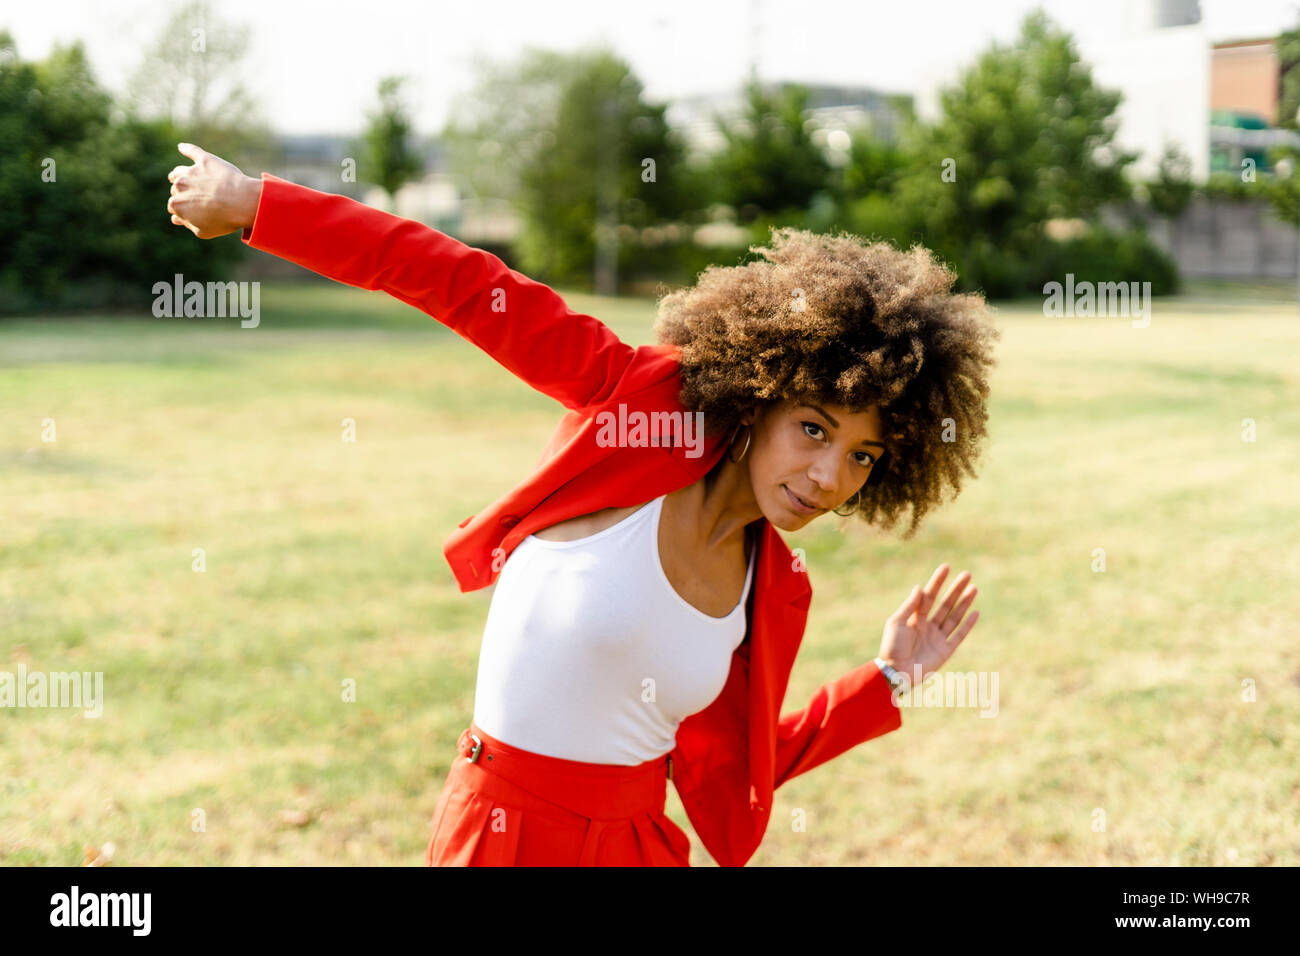 Female teenager wearing white top red tracksuit bottoms jumping